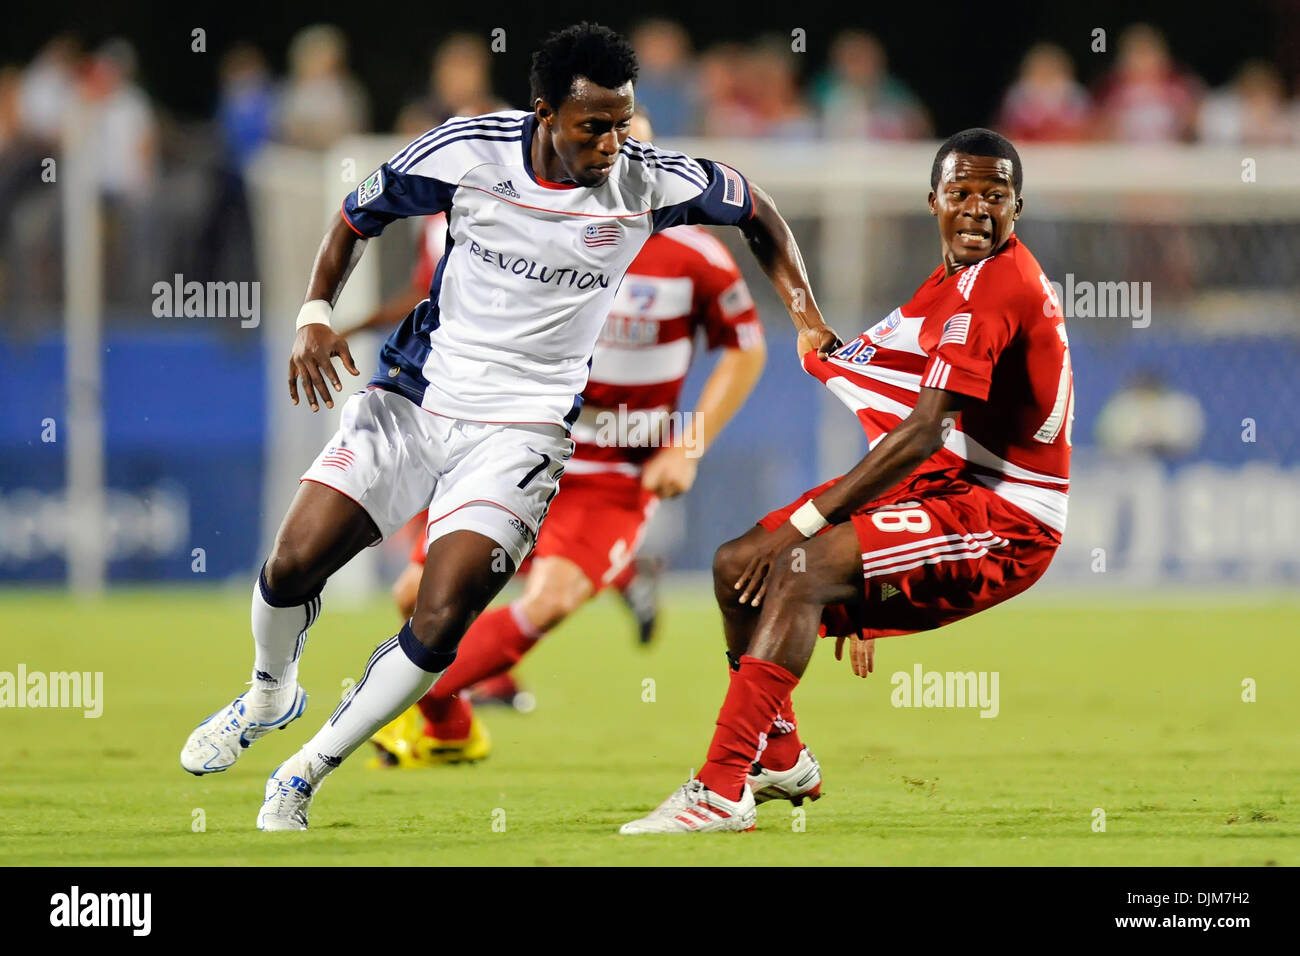 Sept. 22, 2010 - Frisco, Texas, United States of America - New England Revolution midfielder/forward Kenny Mansally (7) fights for position against FC Dallas midfielder Marvin Chavez (18) as FC Dallas's unbeaten streak is extended to 16 games as FC Dallas scores in stoppage time earning a draw with the New England Revolution at Pizza Hut Park in Frisco, Texas. (Credit Image: © Stev Stock Photo